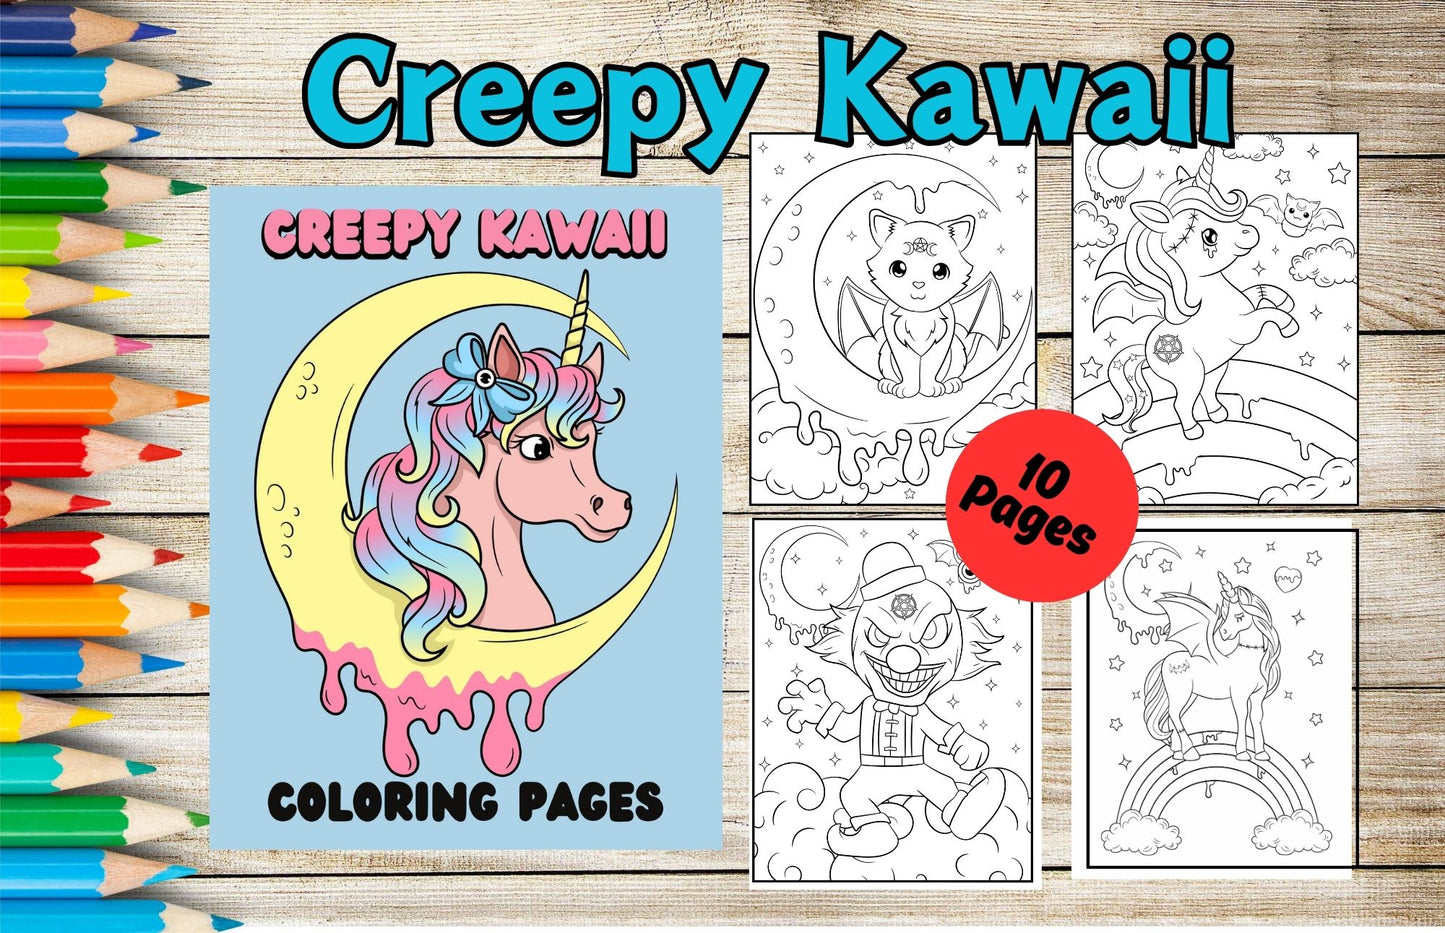 Creepy Kawaii Coloring Pages For Girls- Instant Digital Download